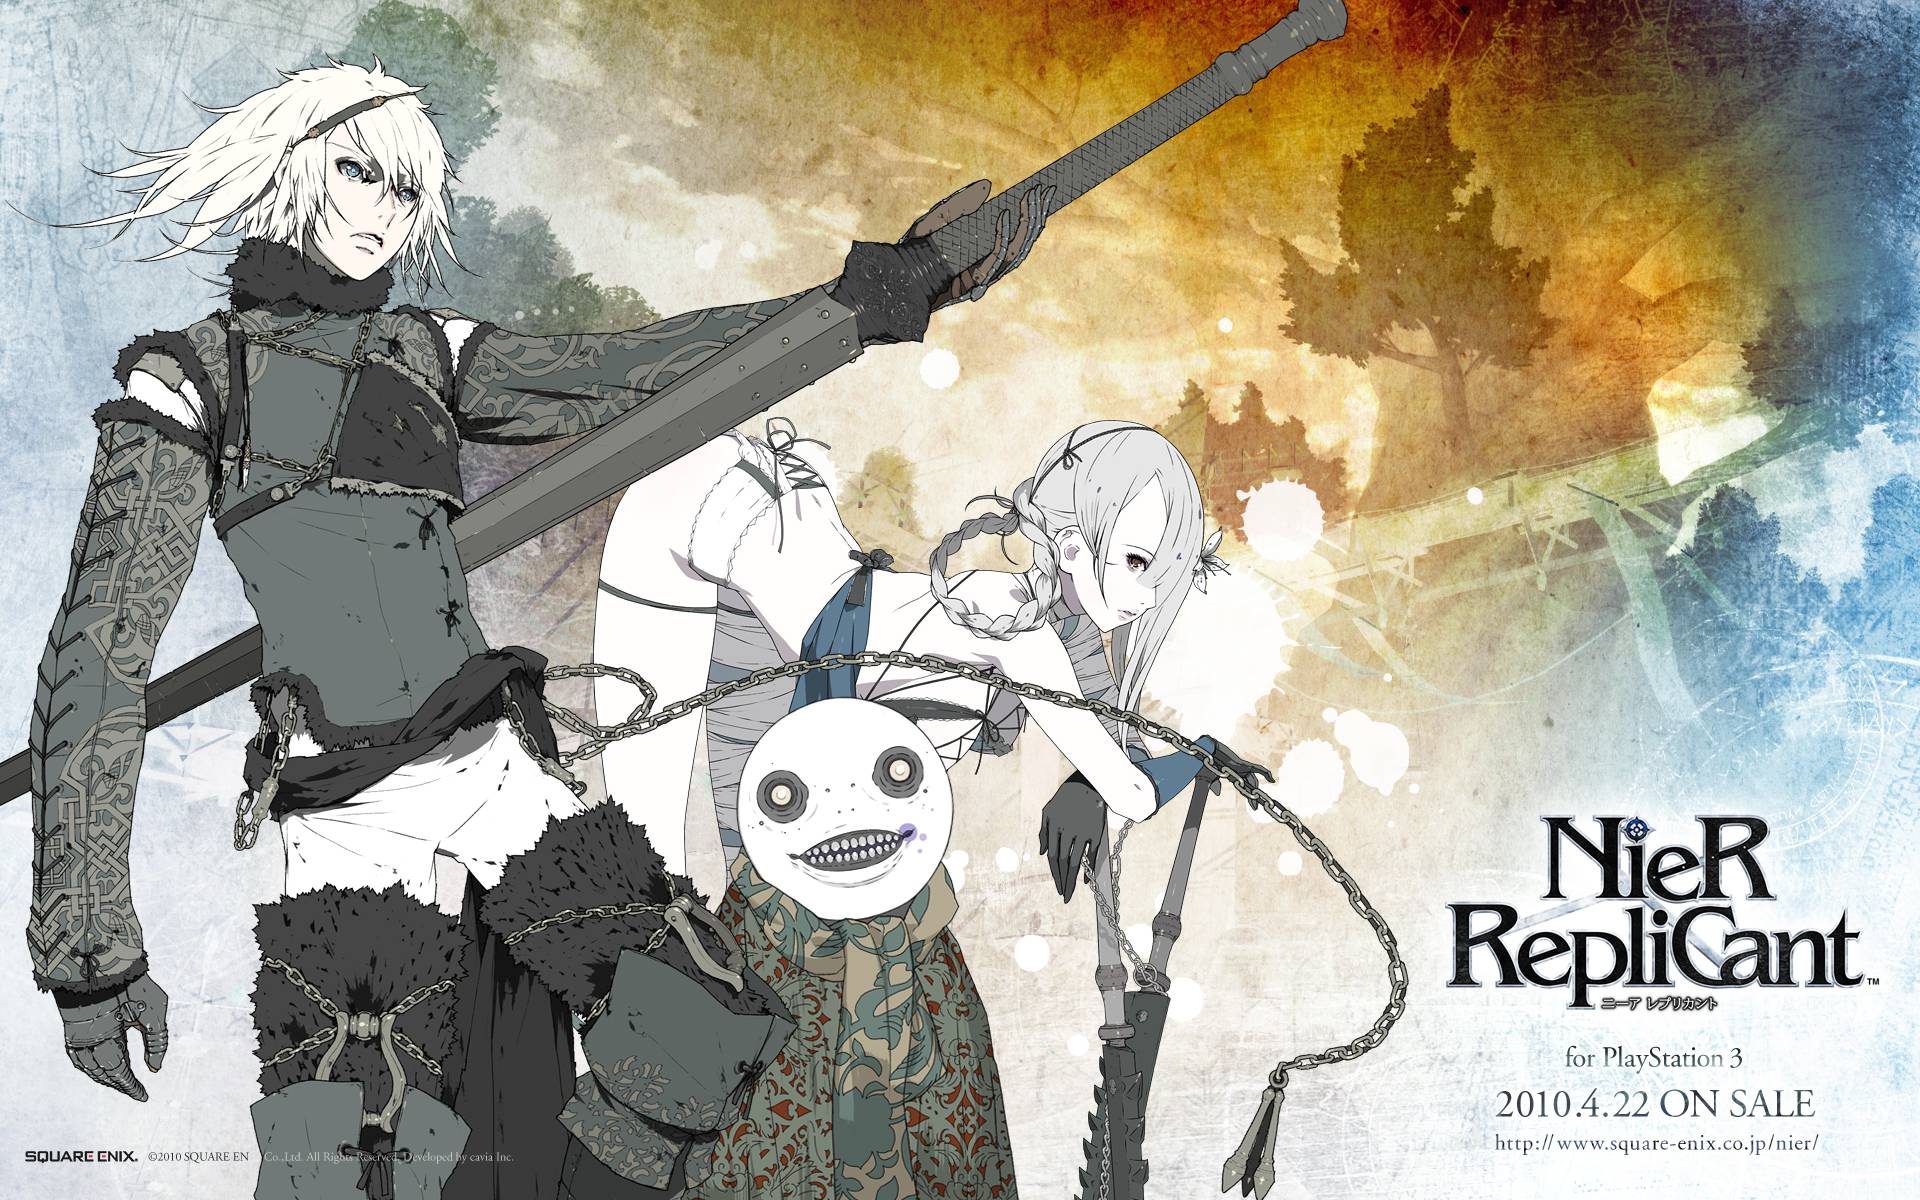 Nier Replicant ver. 1.22474487139 PC predicted system requirements: Can